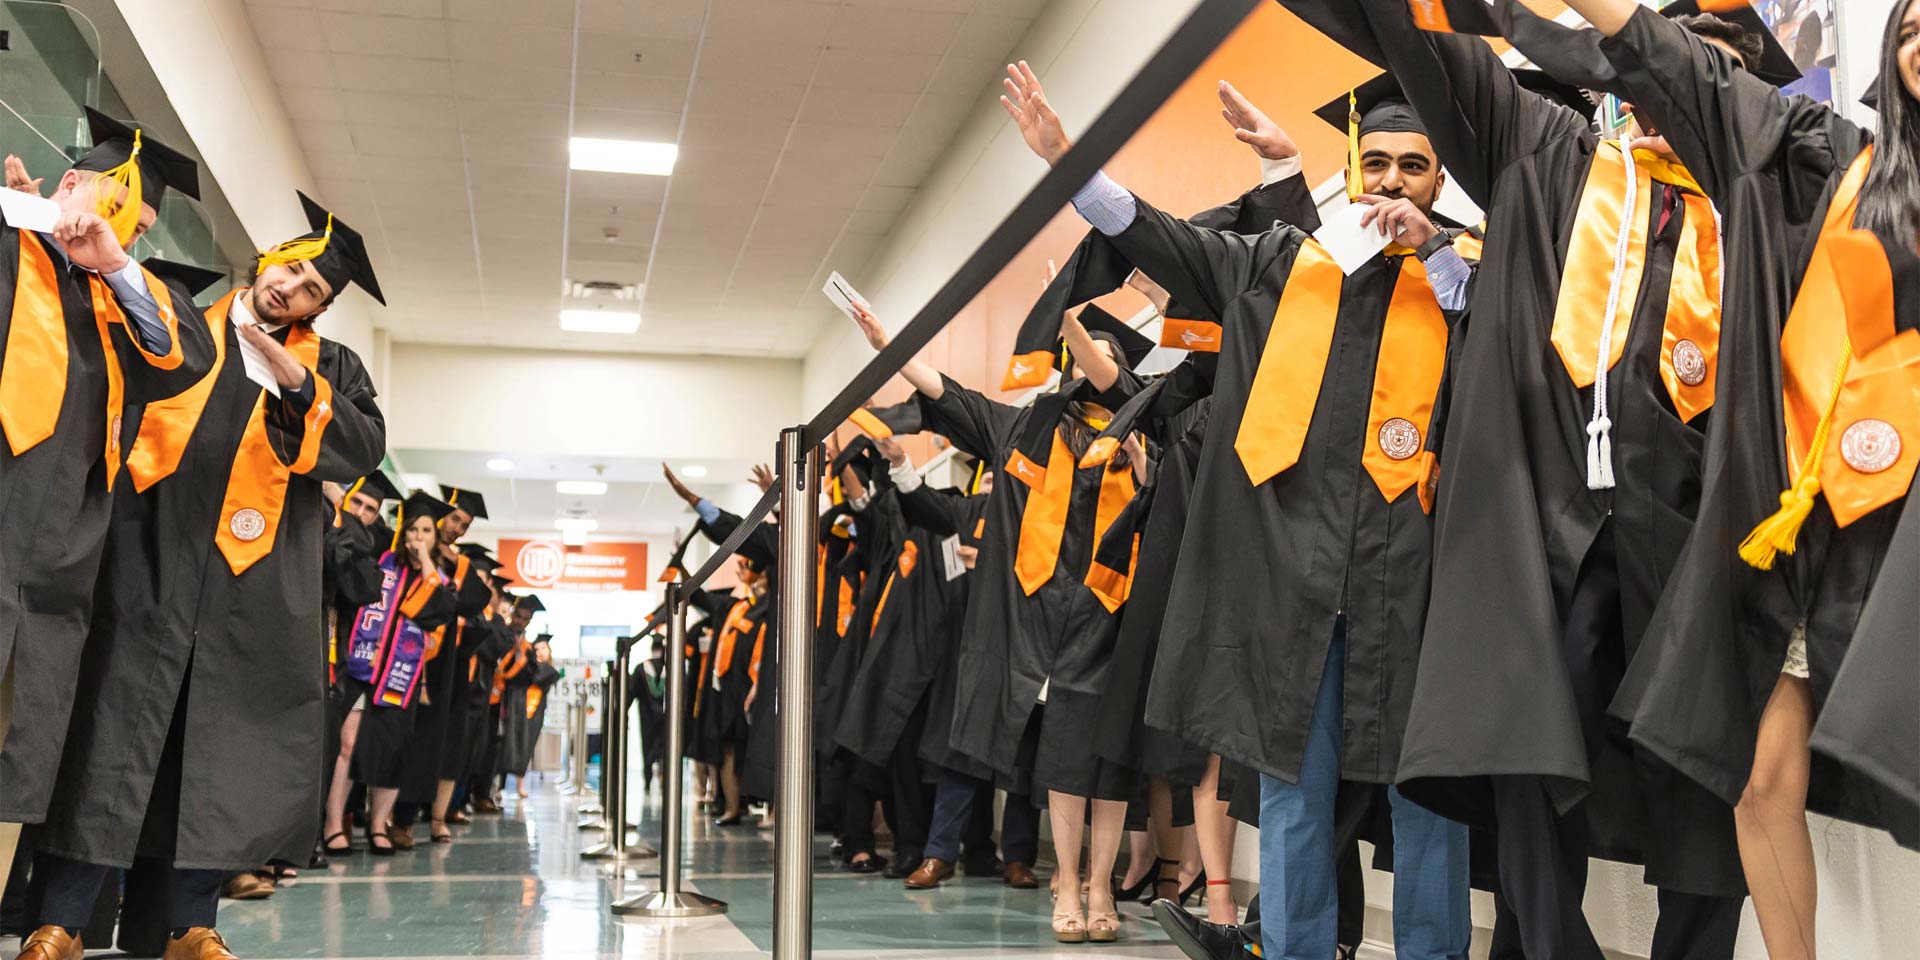 Before their commencement ceremony, students from the Naveen Jindal School of Management practiced the Whoosh, a sign designed for Comets to show their school spirit.